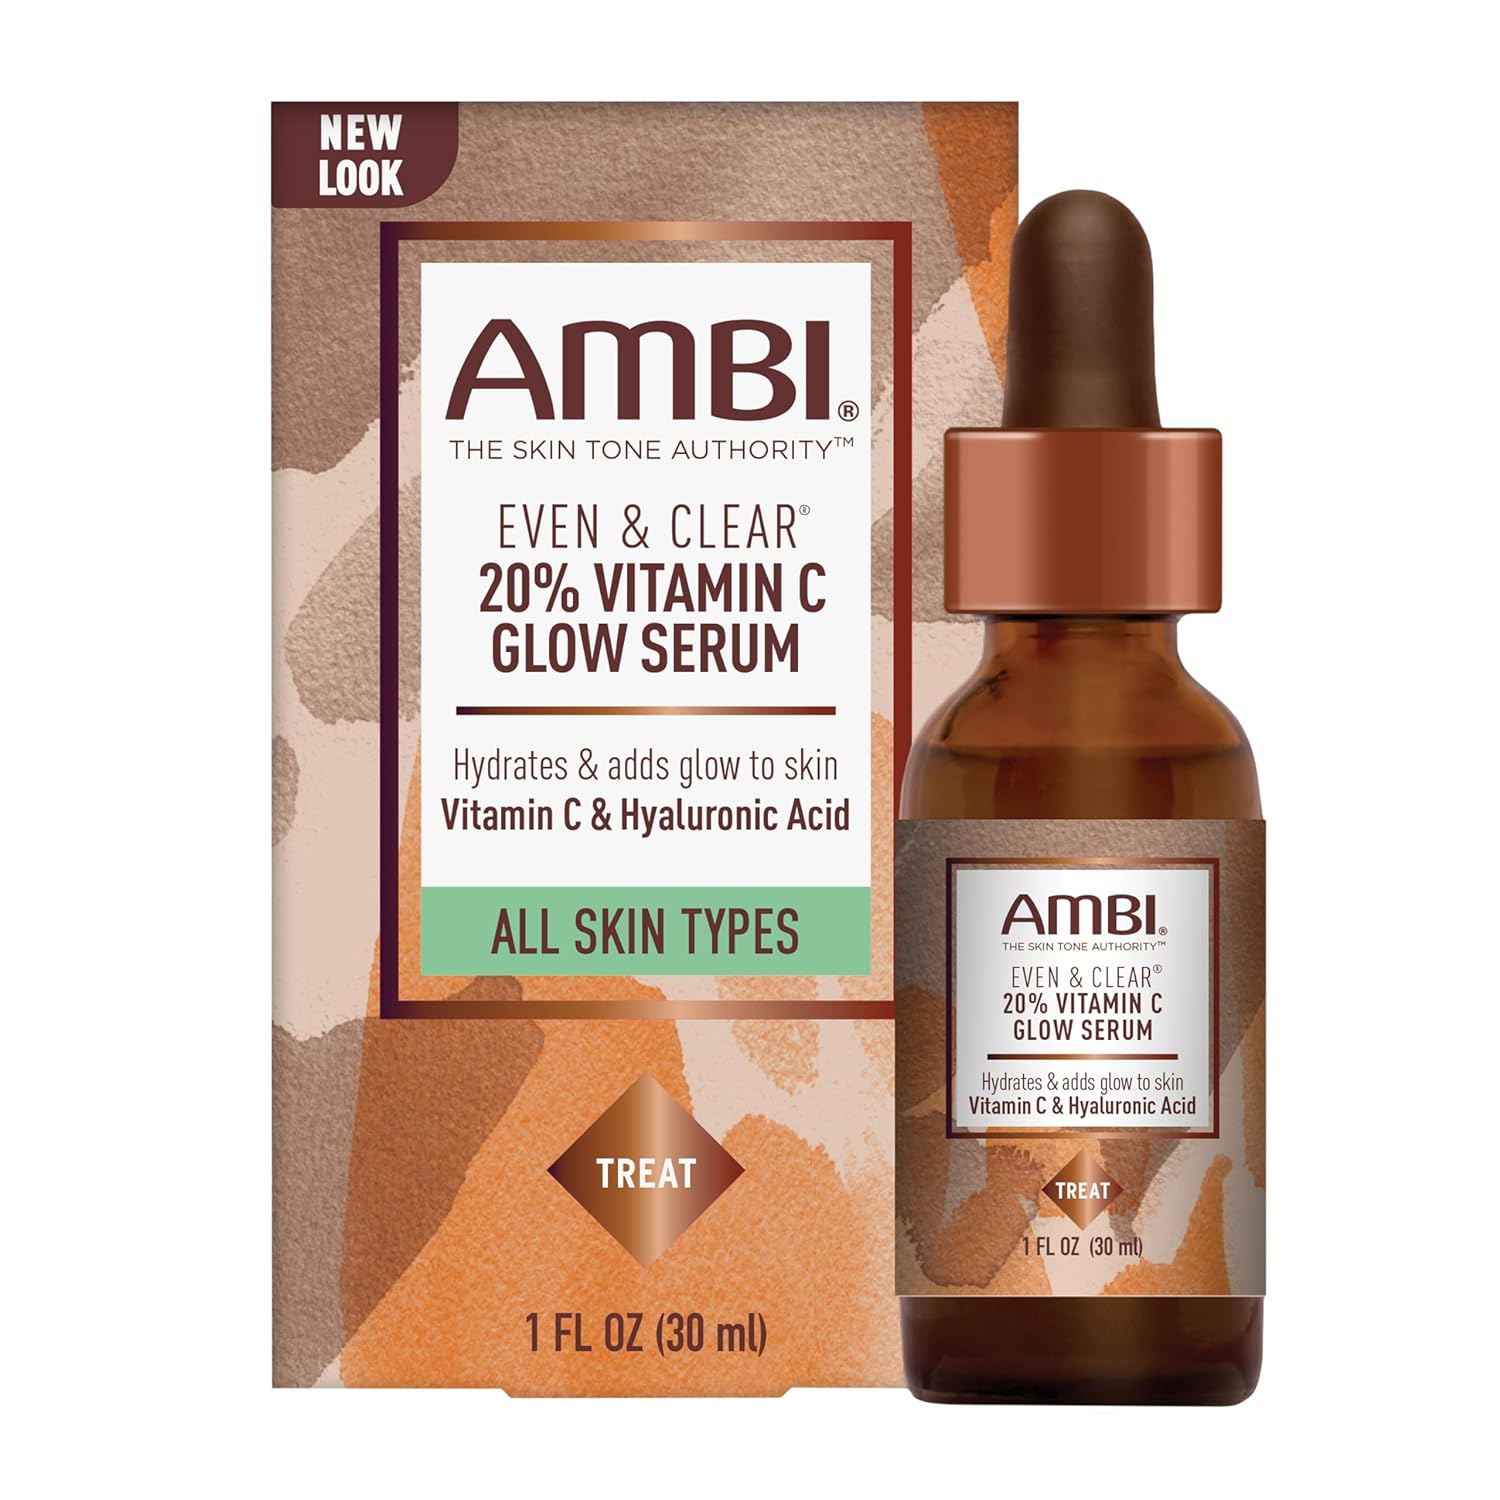 Ambi Even & Clear Vitamin C Infused Glow Serum for 